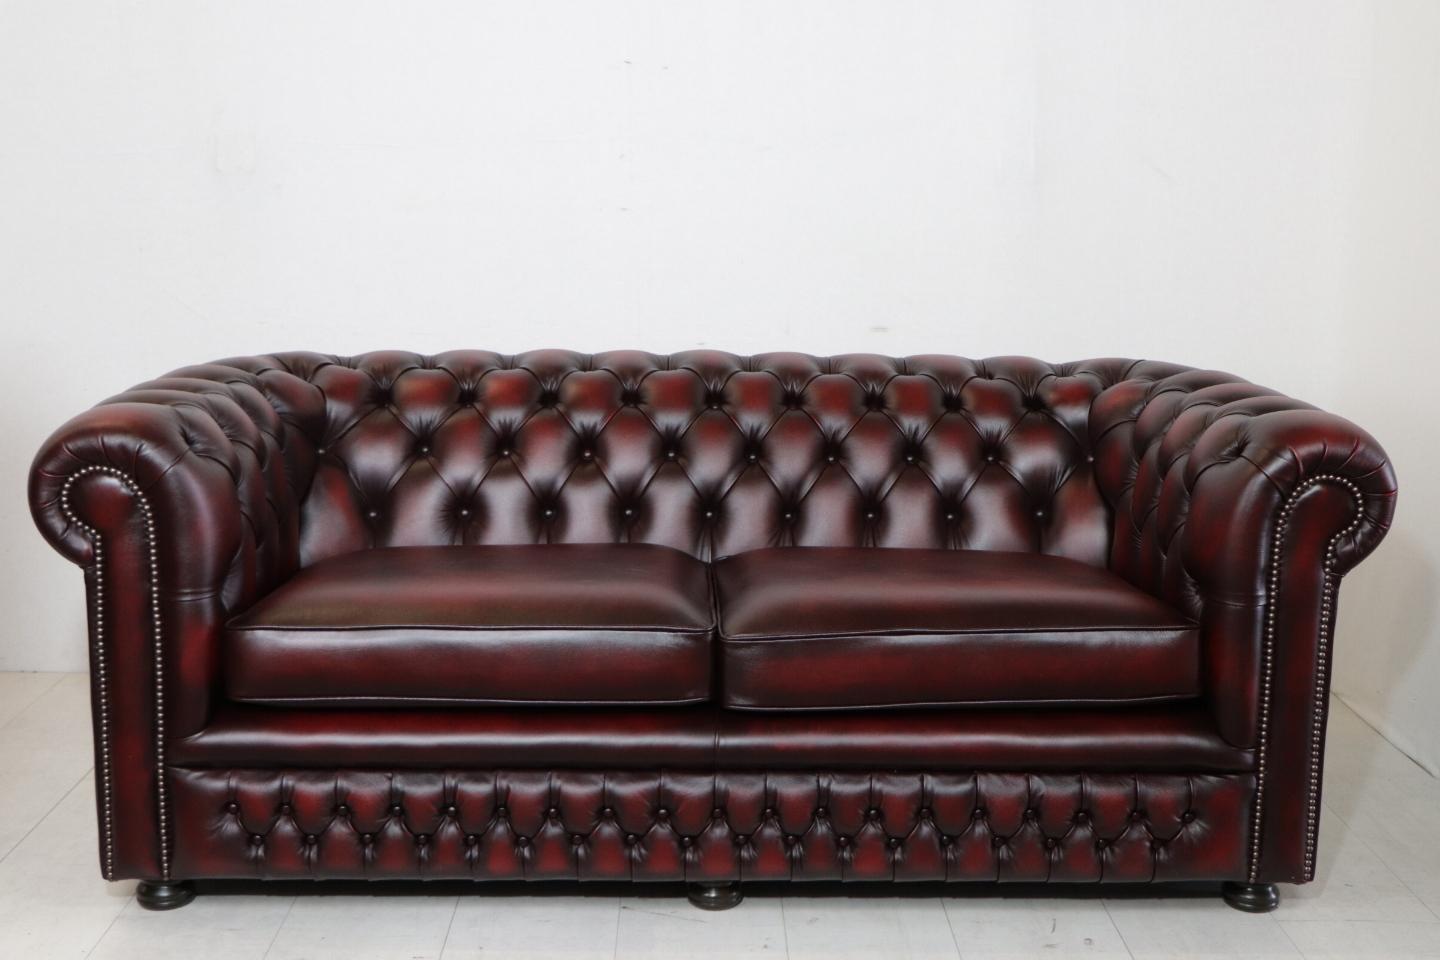 Chesterfield Sofa "London Classic" 3-Sitzer, Birch Antique Red - sofort lieferbar